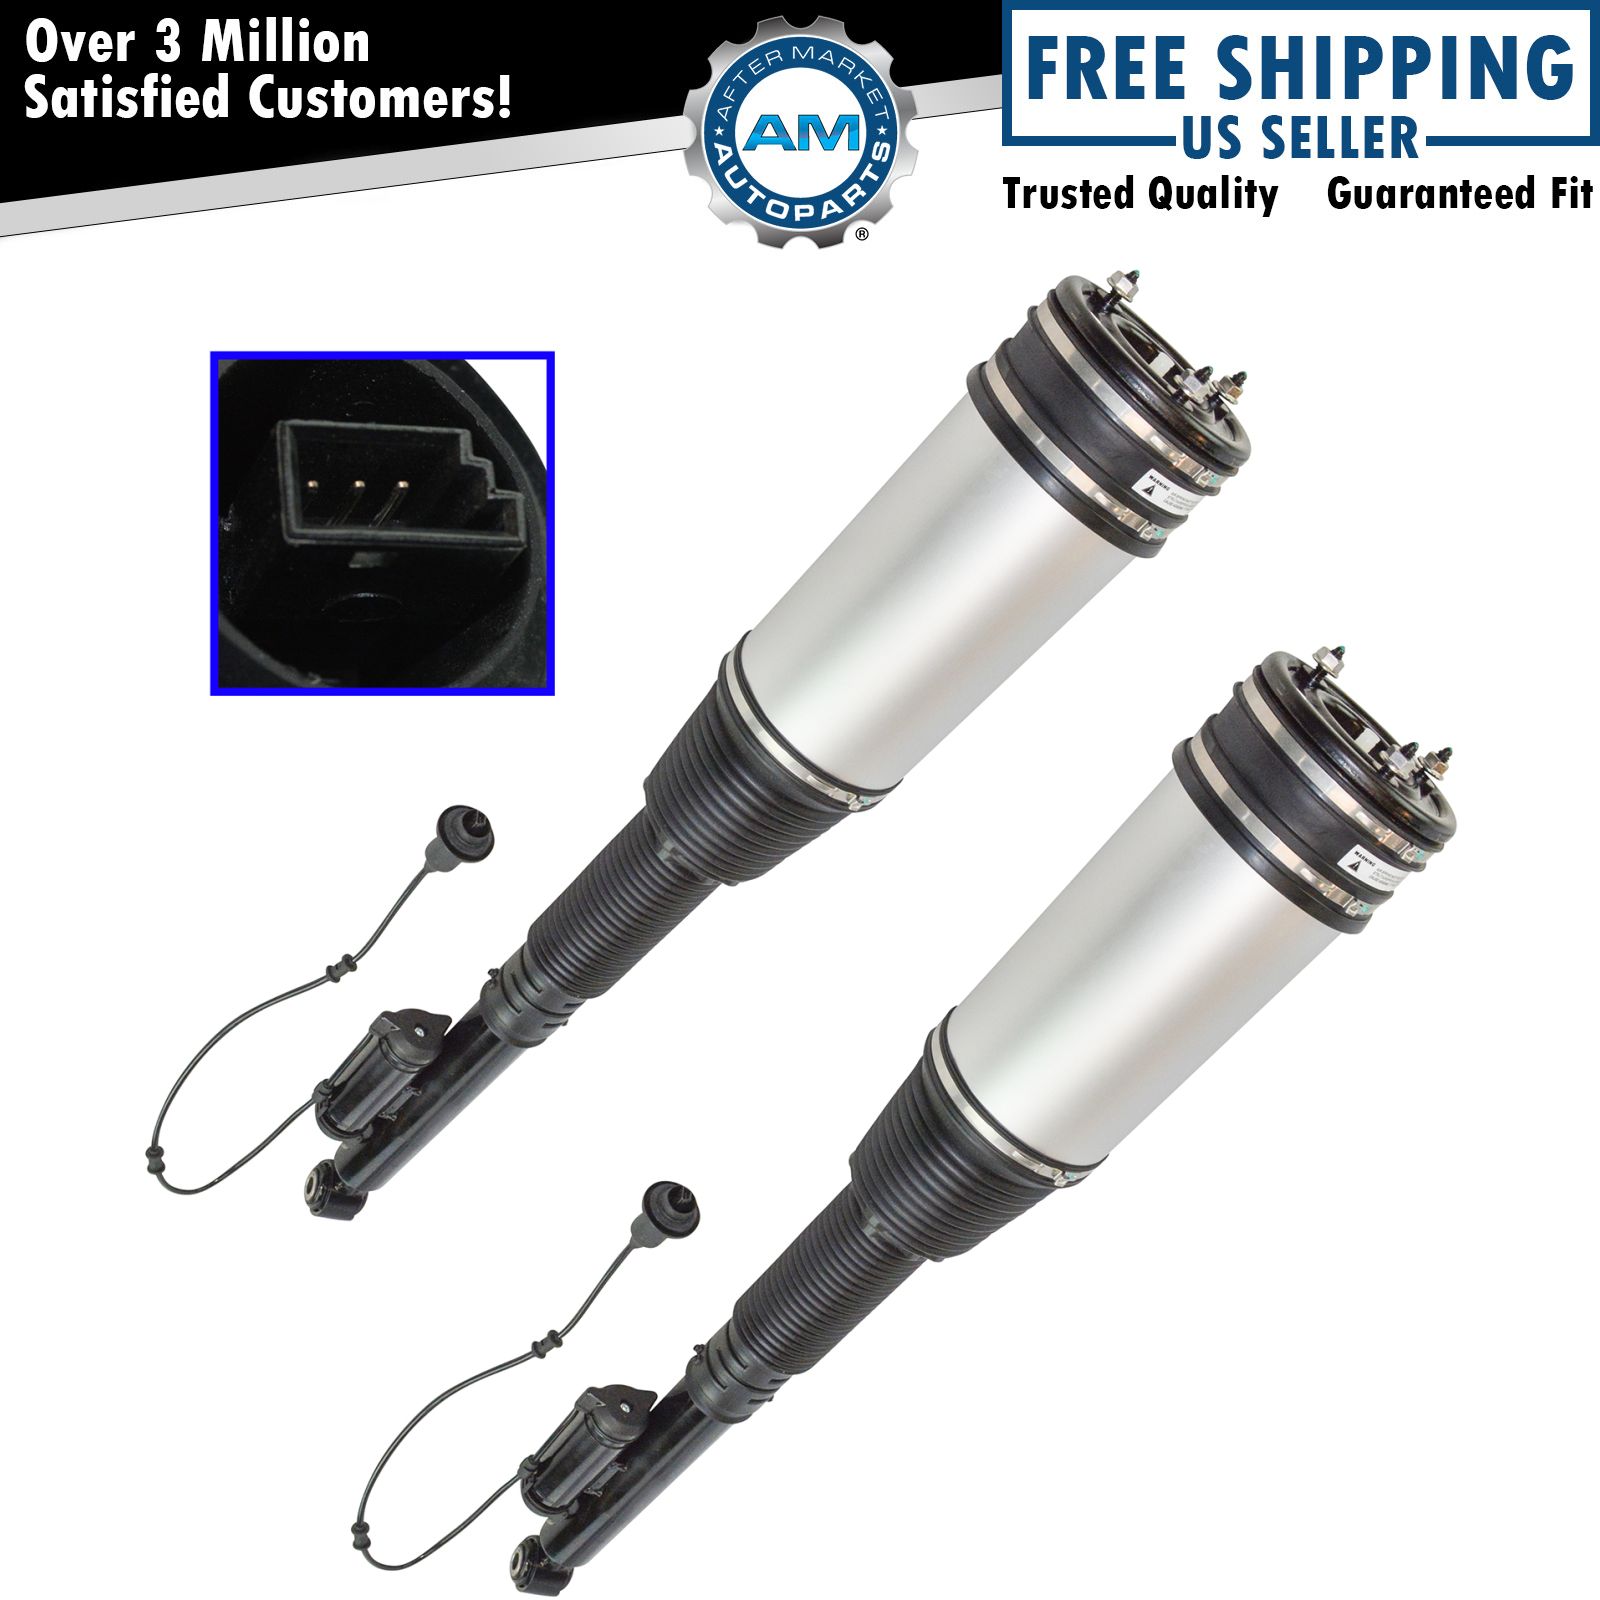 Rear Air Shock Strut Assembly LH & RH Kit Pair Set of 2 for Mercedes W220 New